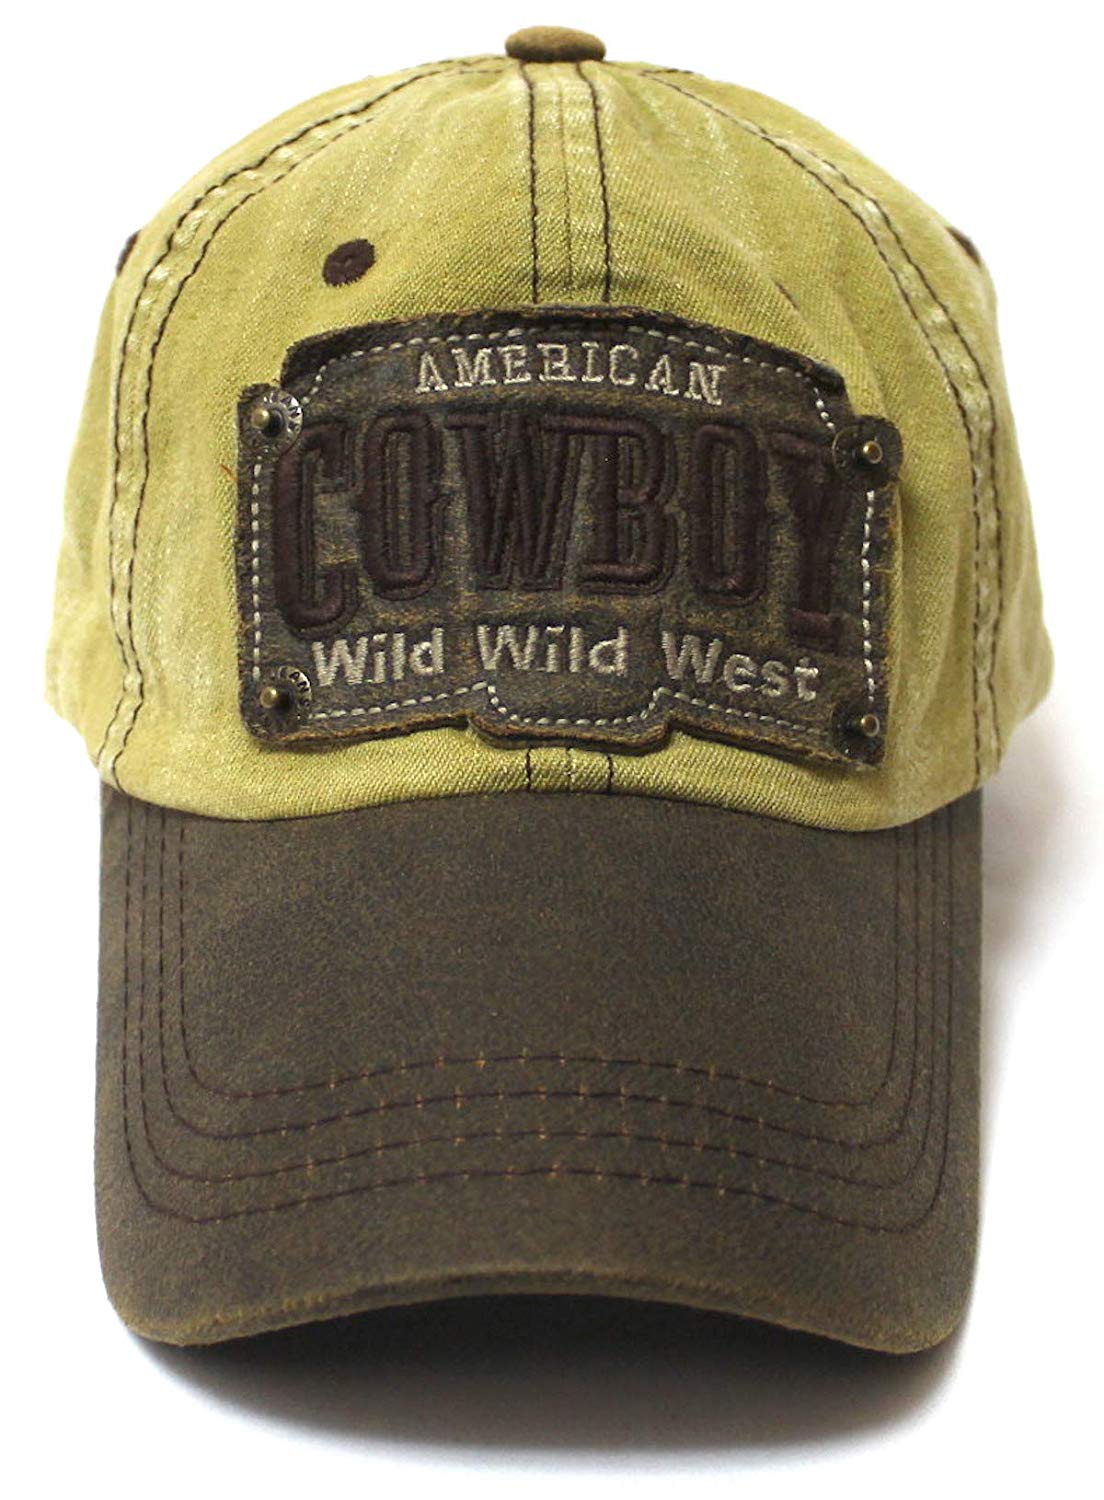 Classic Ballcap American Cowboy Wild Wild West Patch Embroidery Vintage Hat, Raw Tan - Caps 'N Vintage 